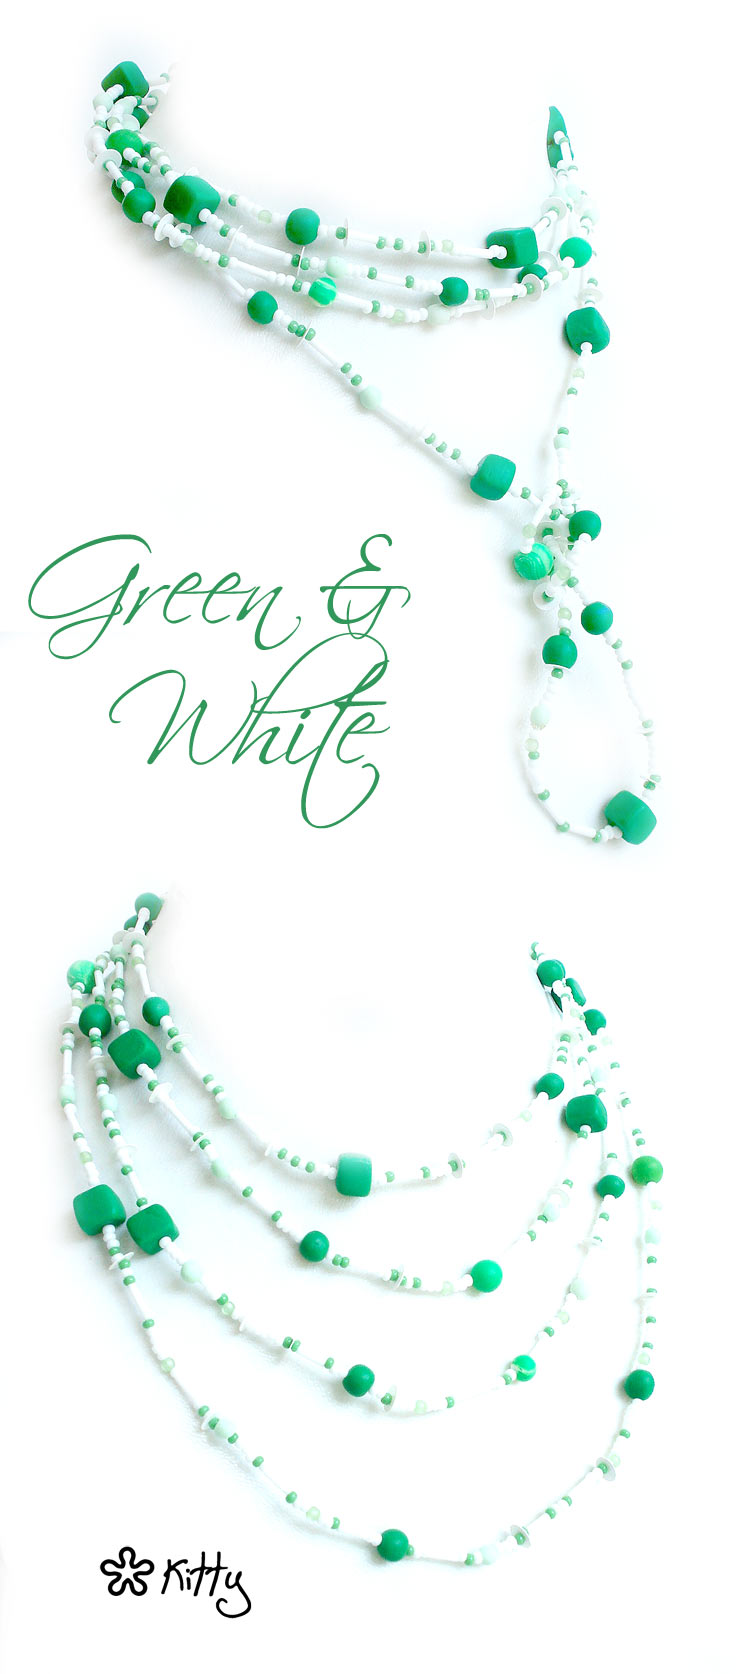 _Green_and_white_by_kitica.jpg